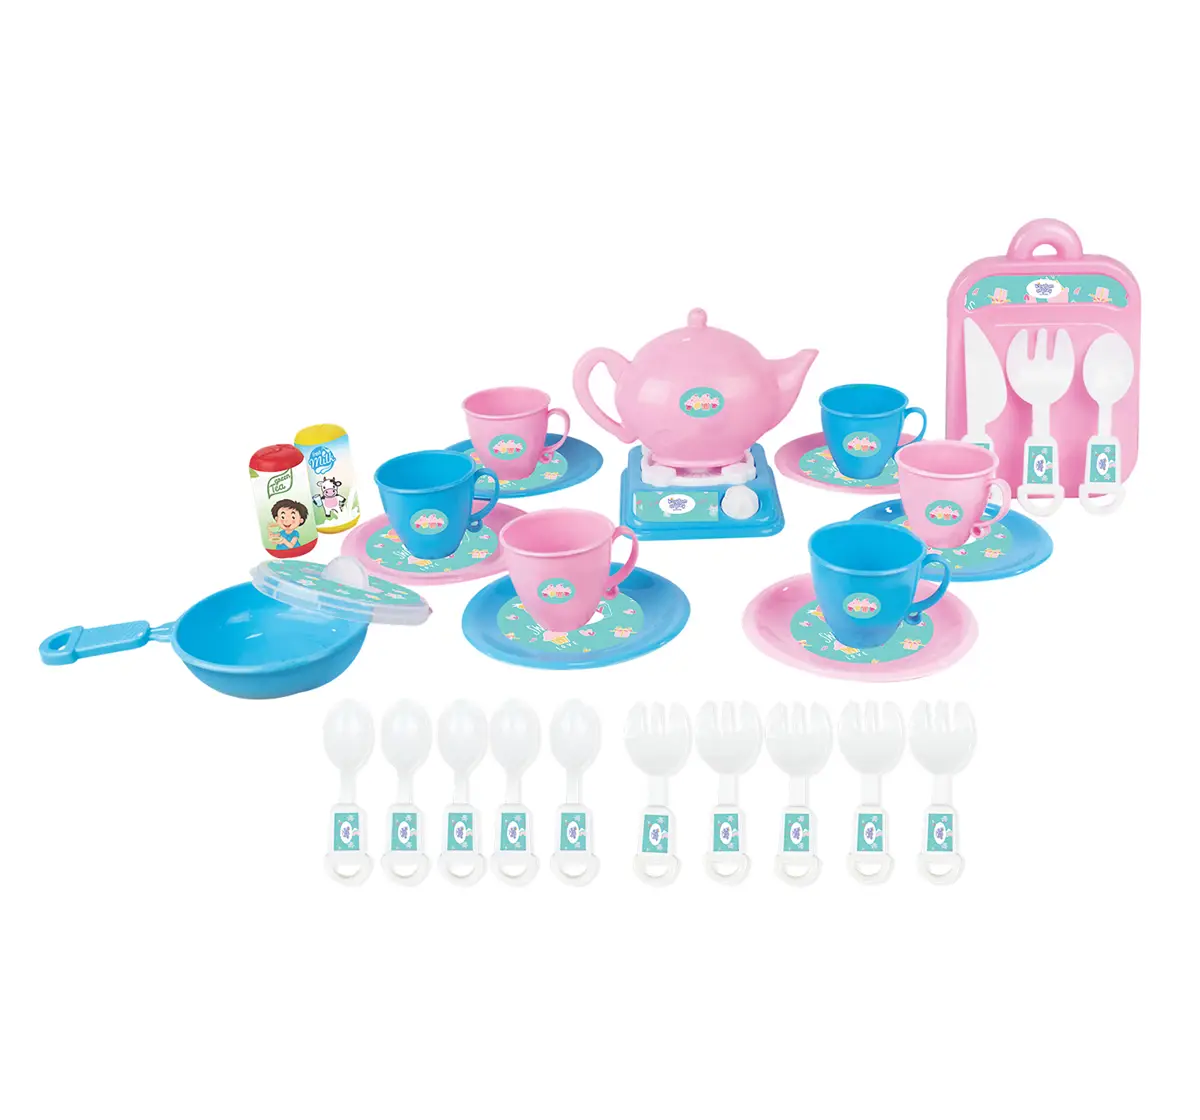 Kingdom Of Play Tea Party role play kitchen set for kids Multicolor 24M+